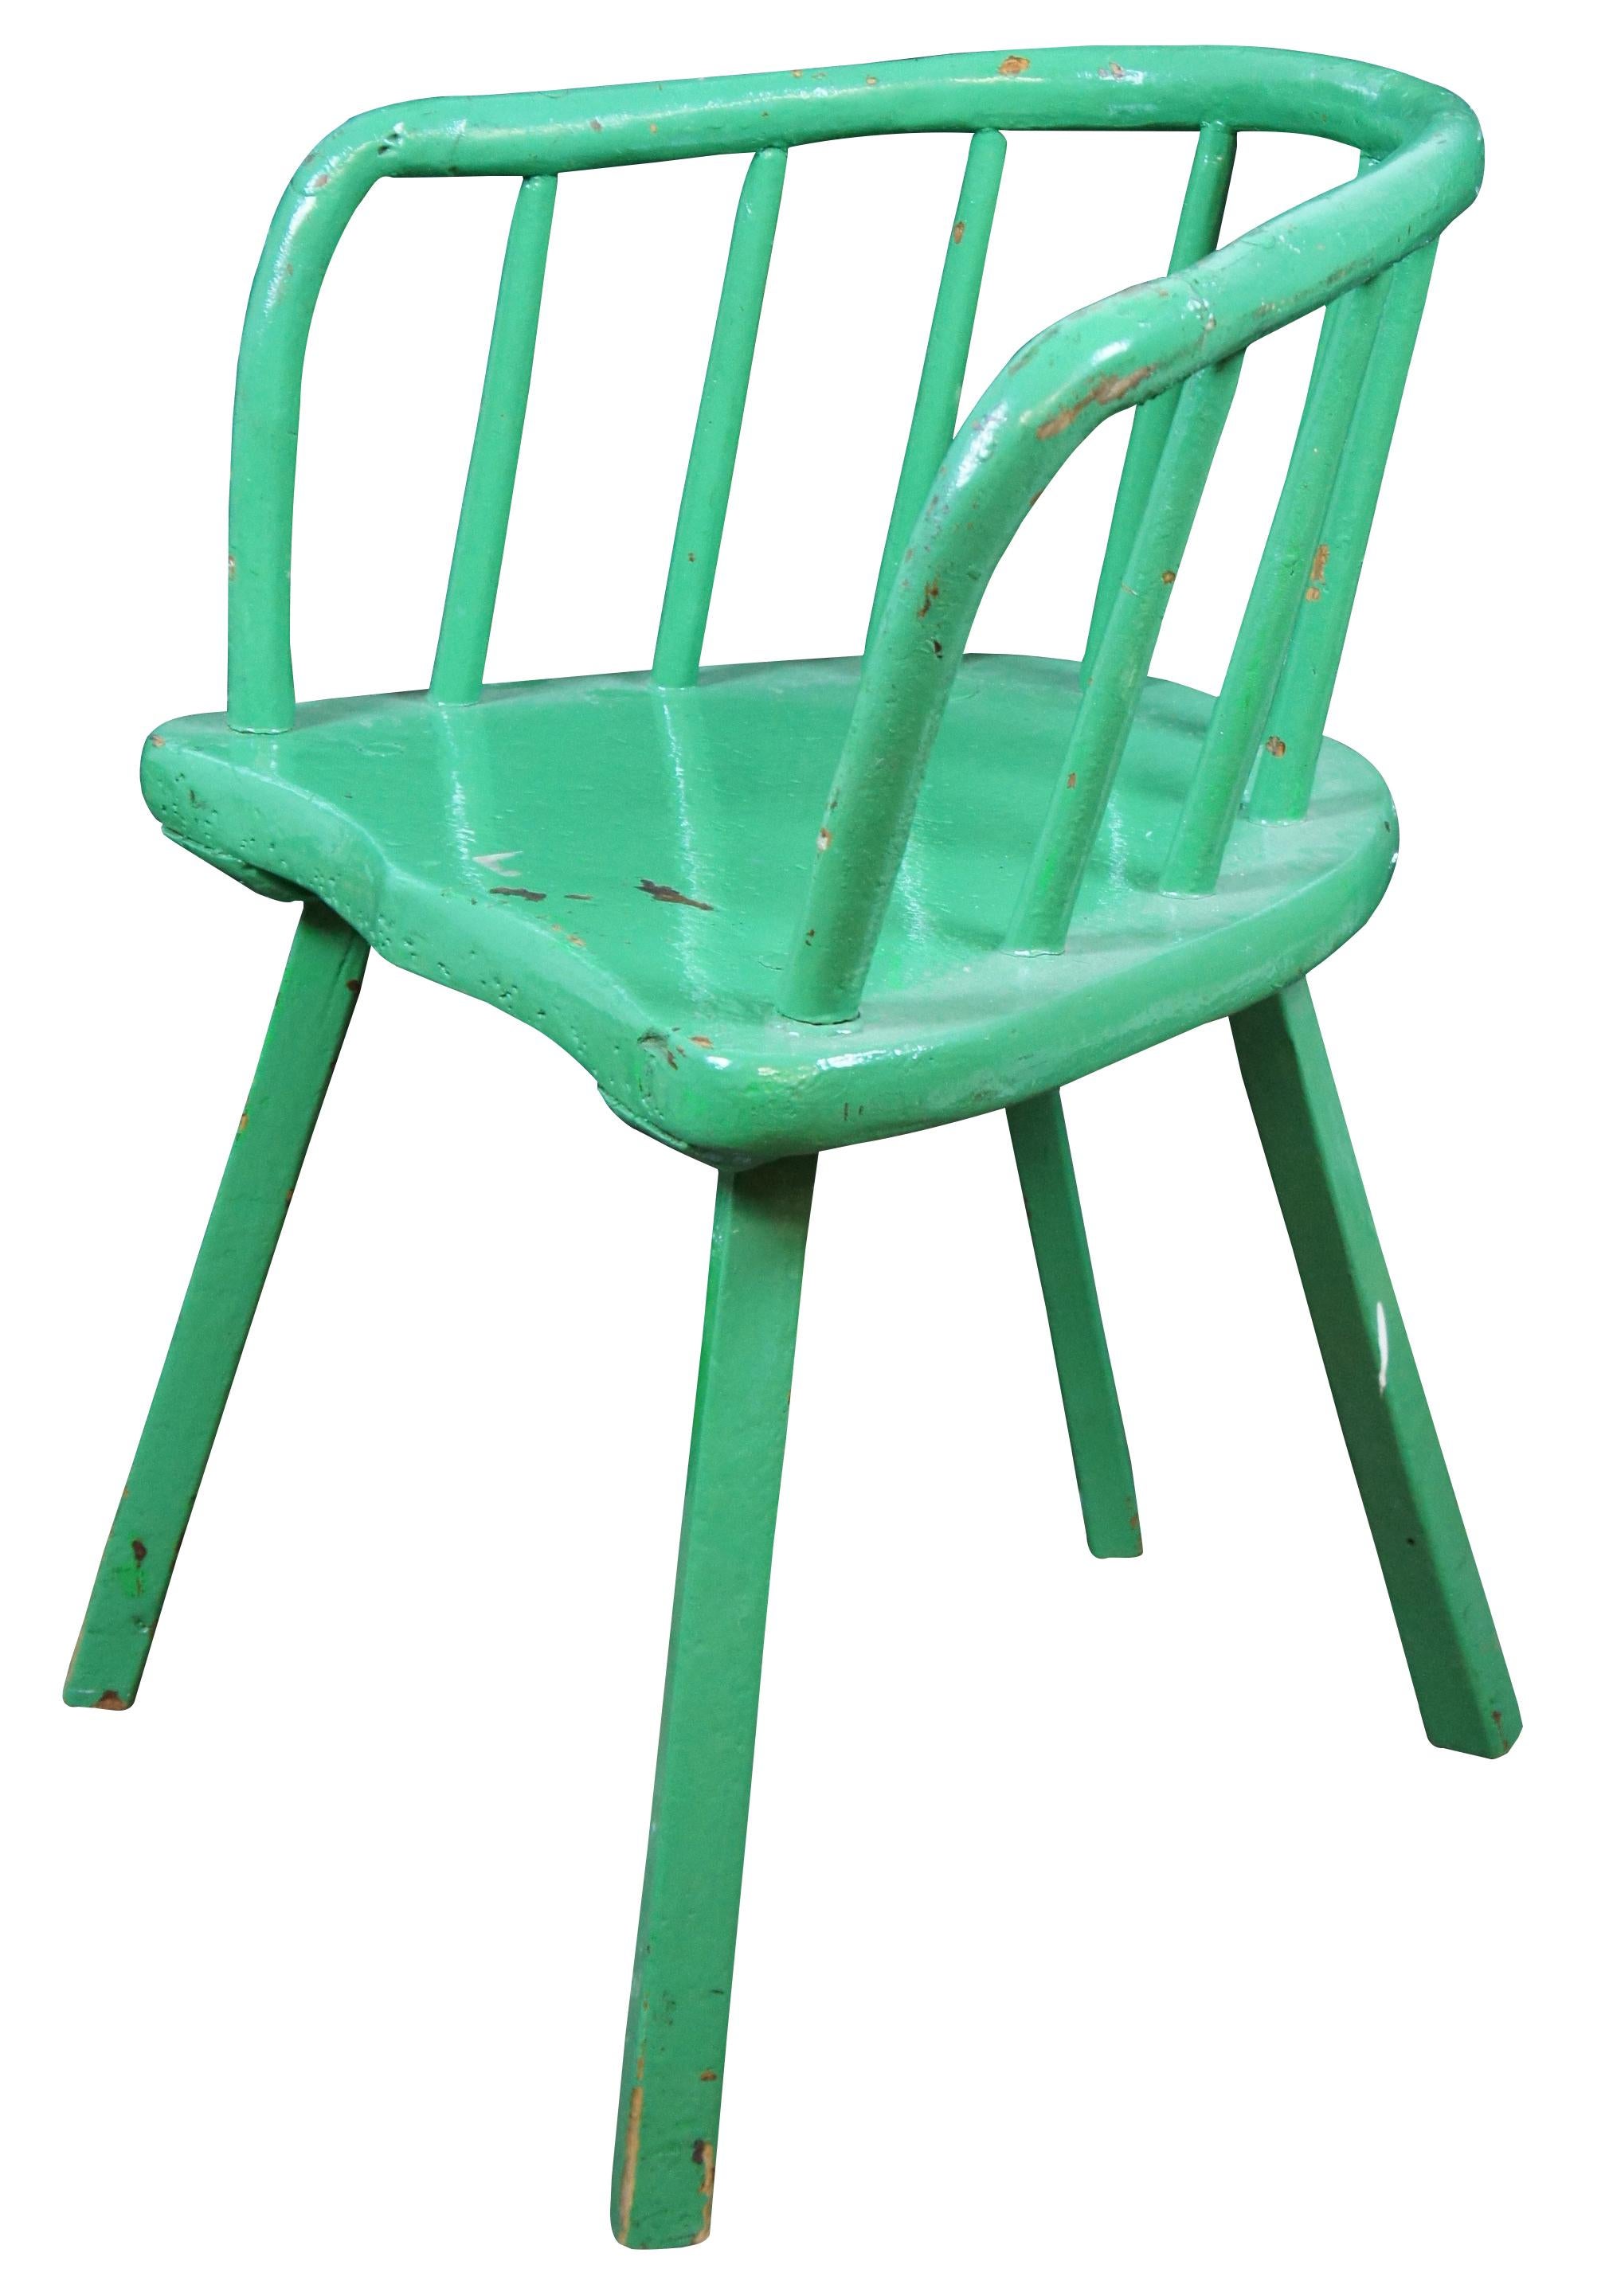 Antique barrel back windsor style chair finished in apple green enamel paint.